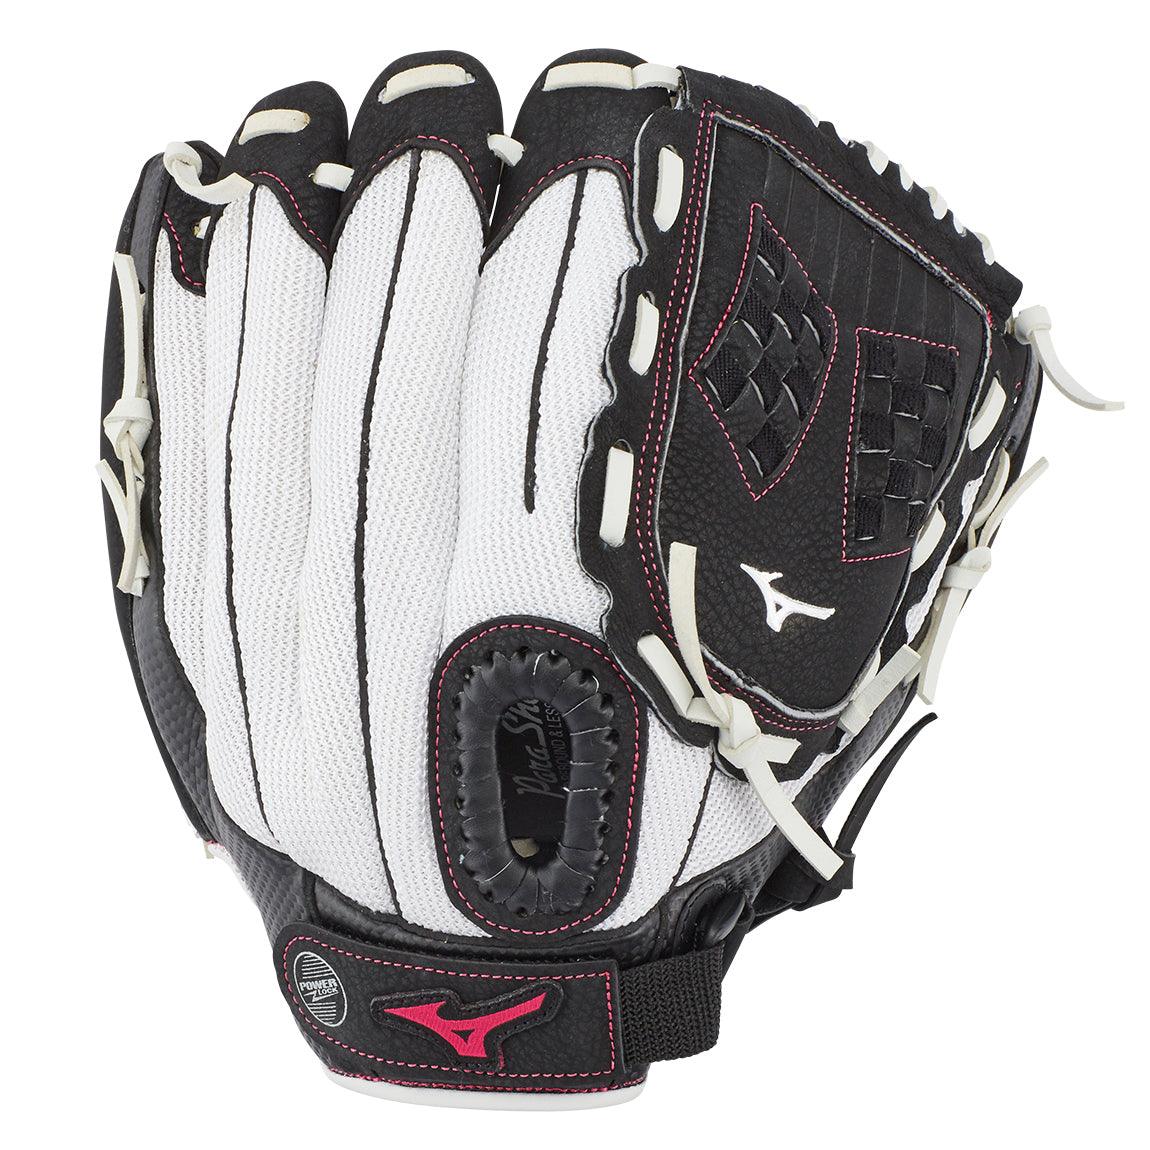 Prospect Finch Series Youth Softball Glove 11.5" - Youth - Sports Excellence